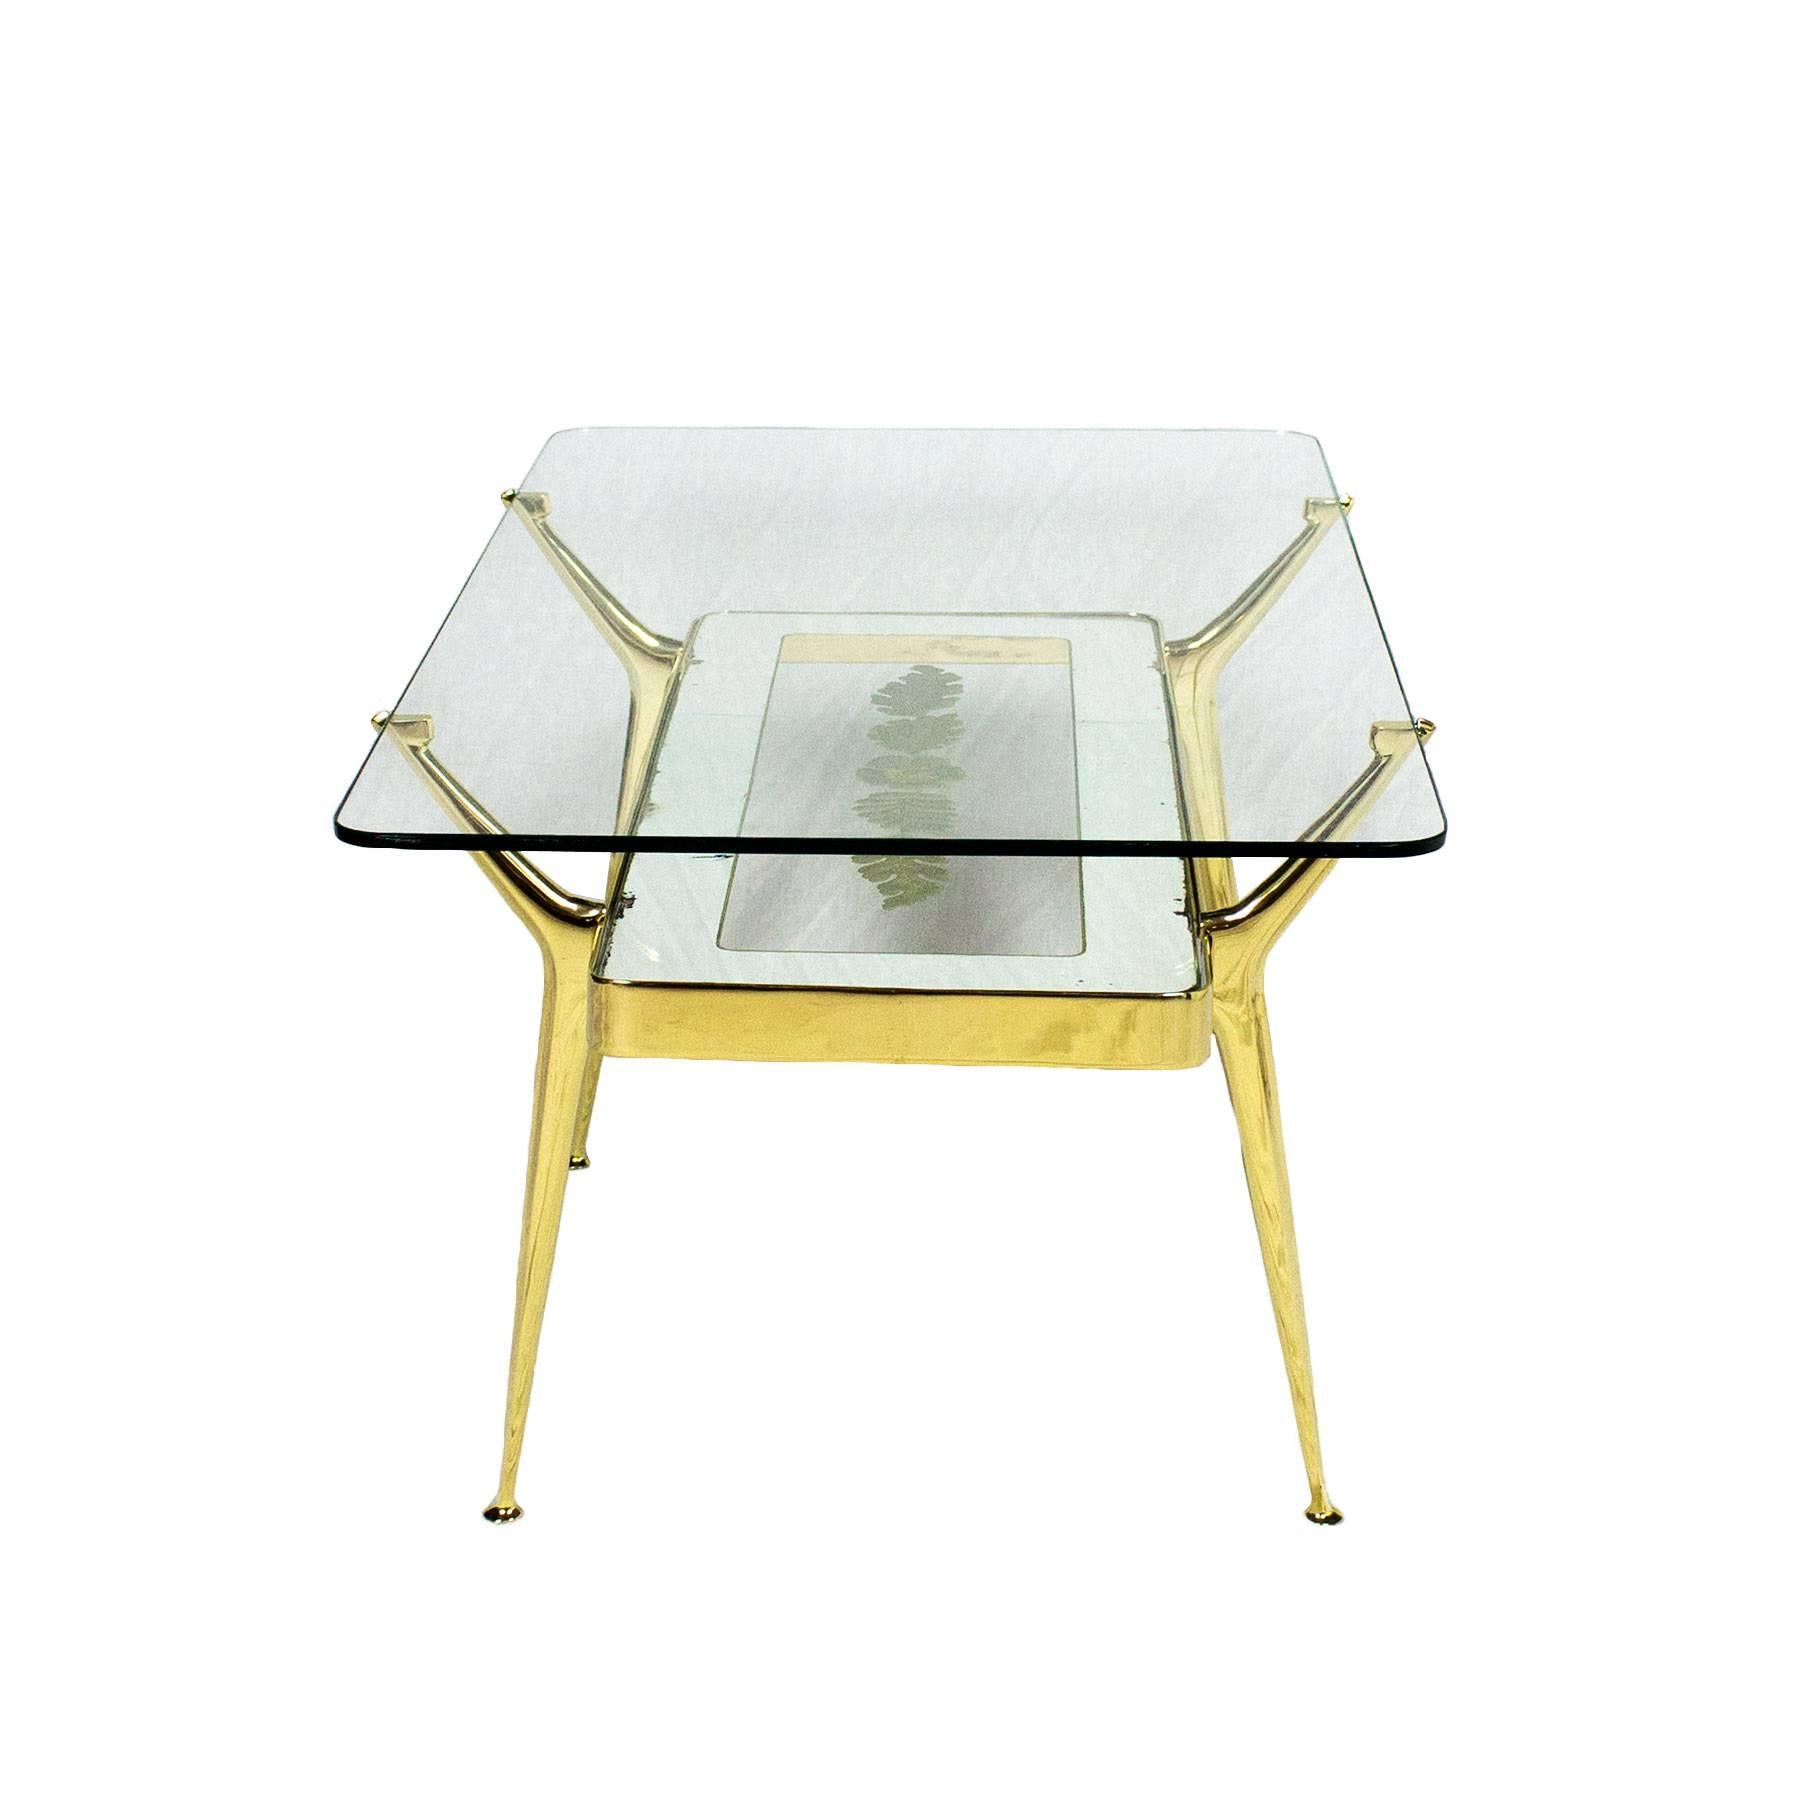 Italian Mid-Century Modern Coffee Table by Cesare Lacca, Mirrored Etched Glass - Italy For Sale